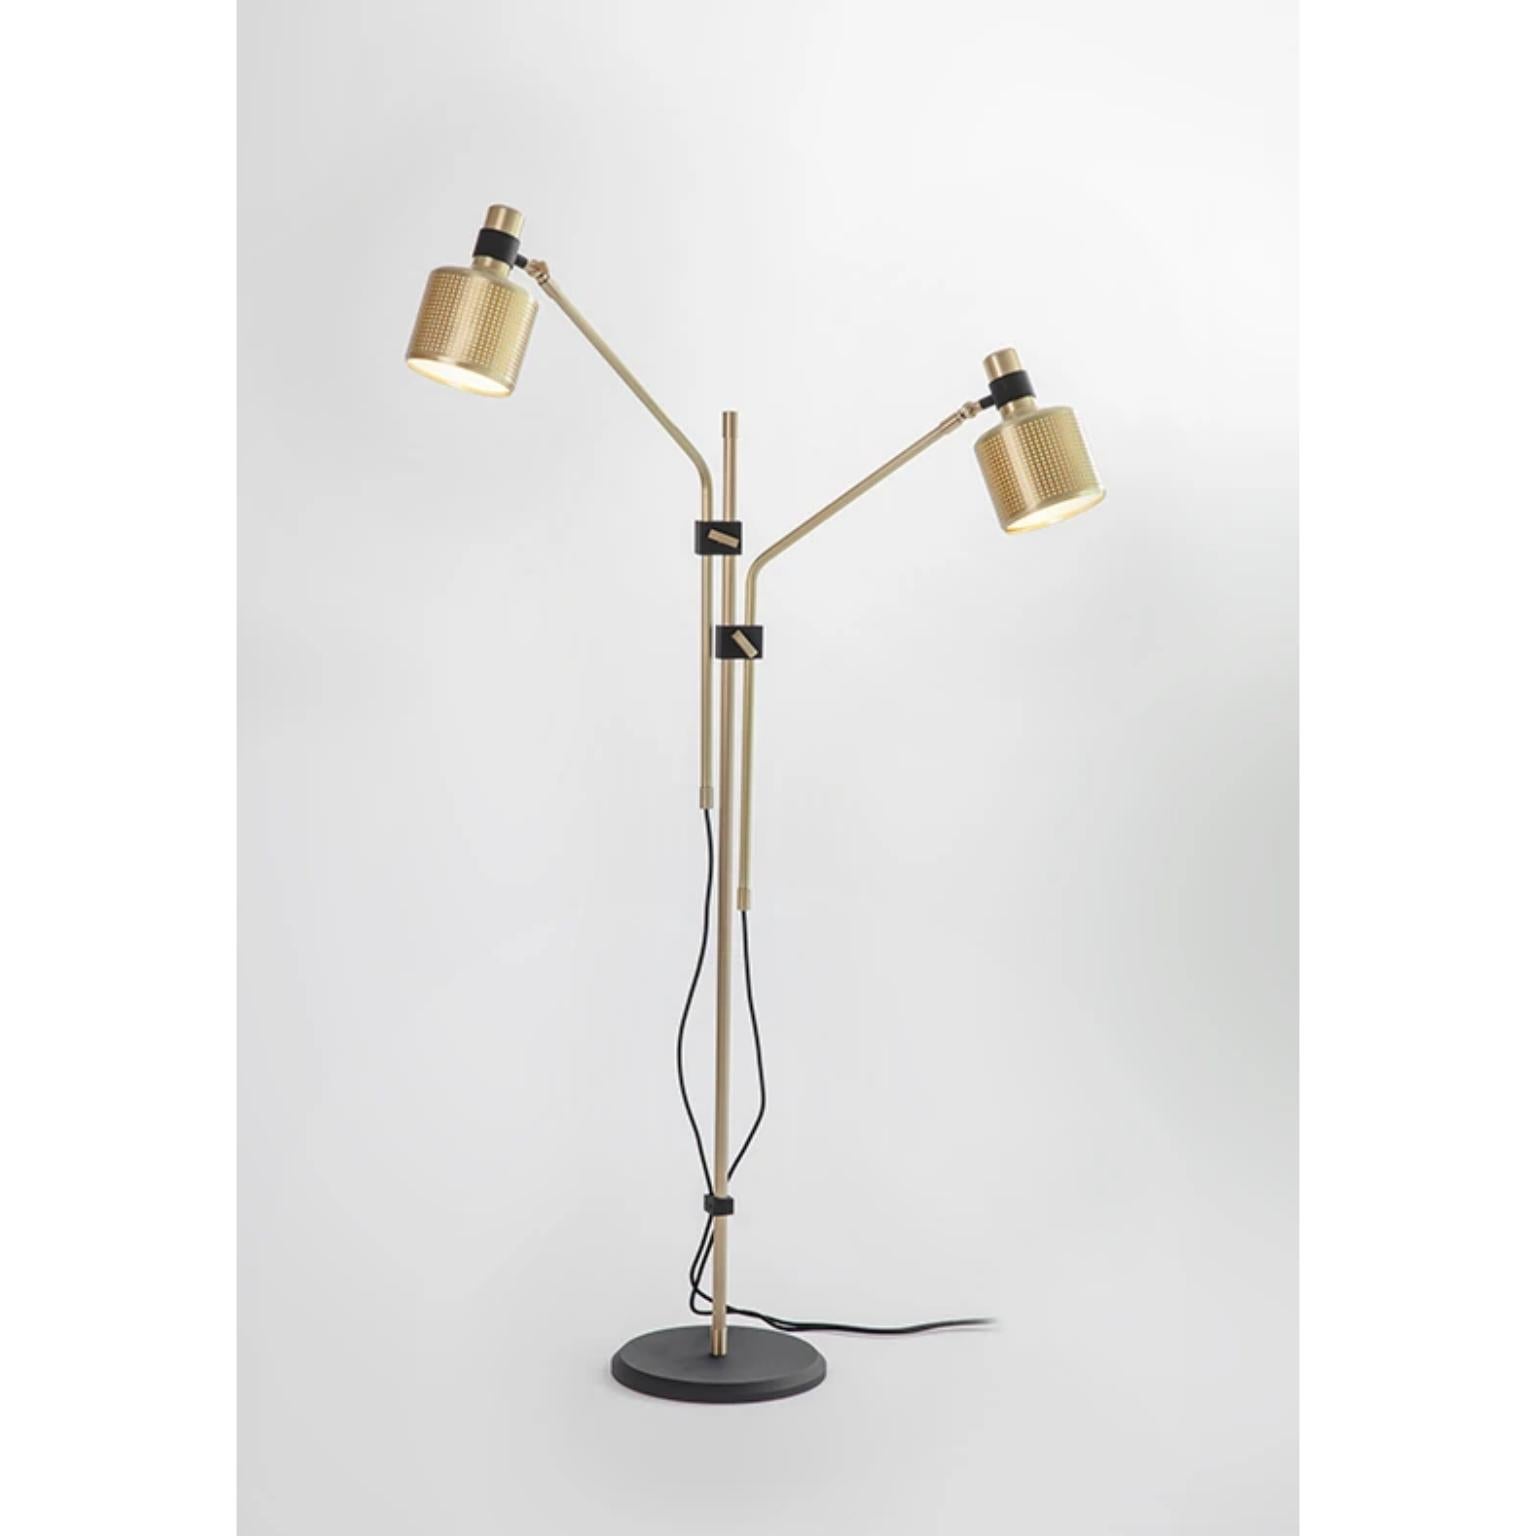 Double Riddle floor lamp by Bert Frank
Dimensions: 25 x 80 x H 130 cm 
Materials: Brass 

All our lamps can be wired according to each country. If sold to the USA it will be wired for the USA for instance.

When Adam Yeats and Robbie Llewellyn